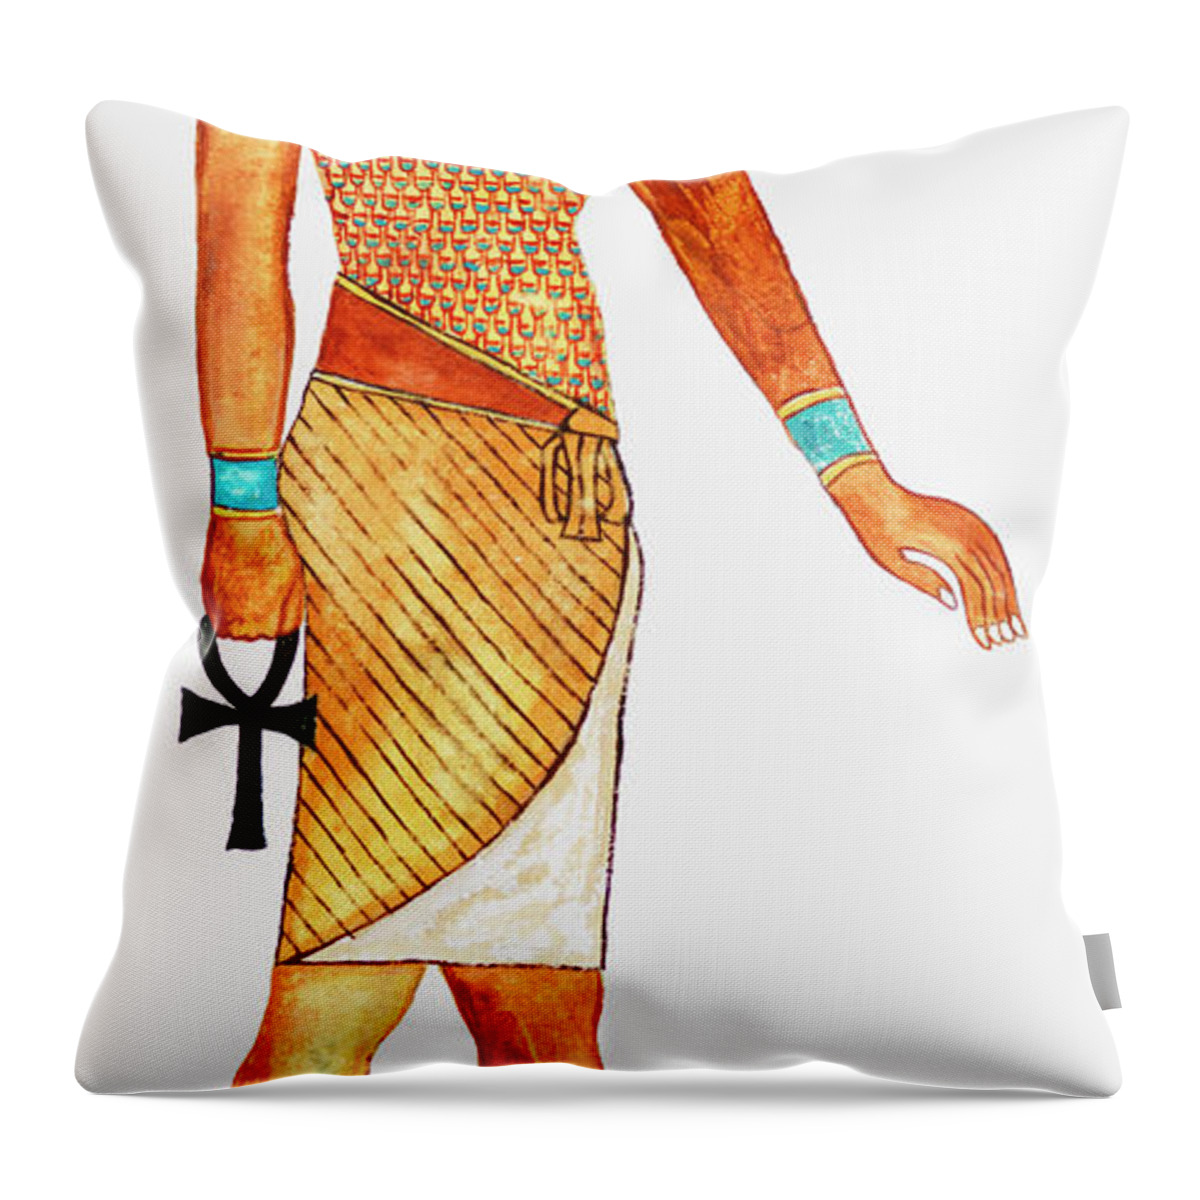 Watercolor Painting Throw Pillow featuring the digital art Illustration Of Ancient Egyptian God Of by Dorling Kindersley